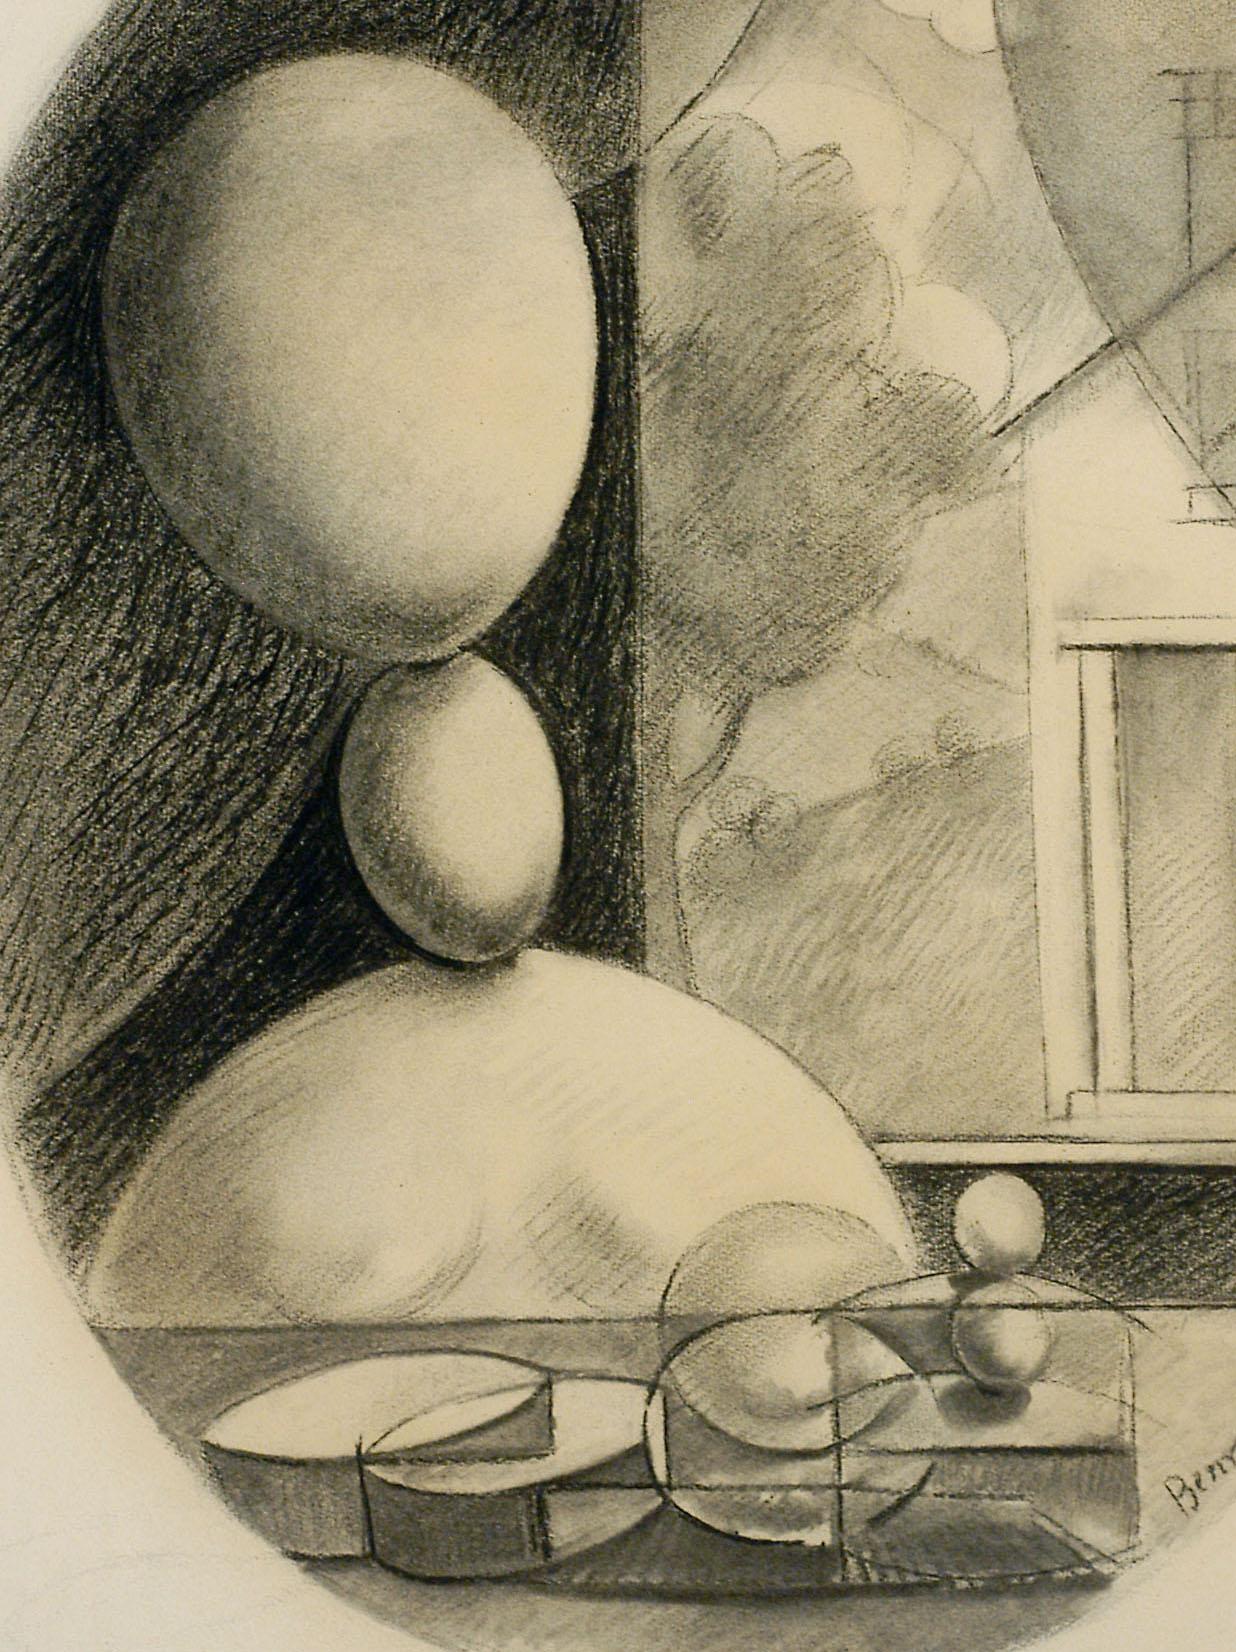 Mlle. Jeanne at the Window, No. II
Charcoal on paper, 1933
Signed and dated lower right (see photo)
Illustrated: Gustafson, Zimmerli Museum, 1988, 